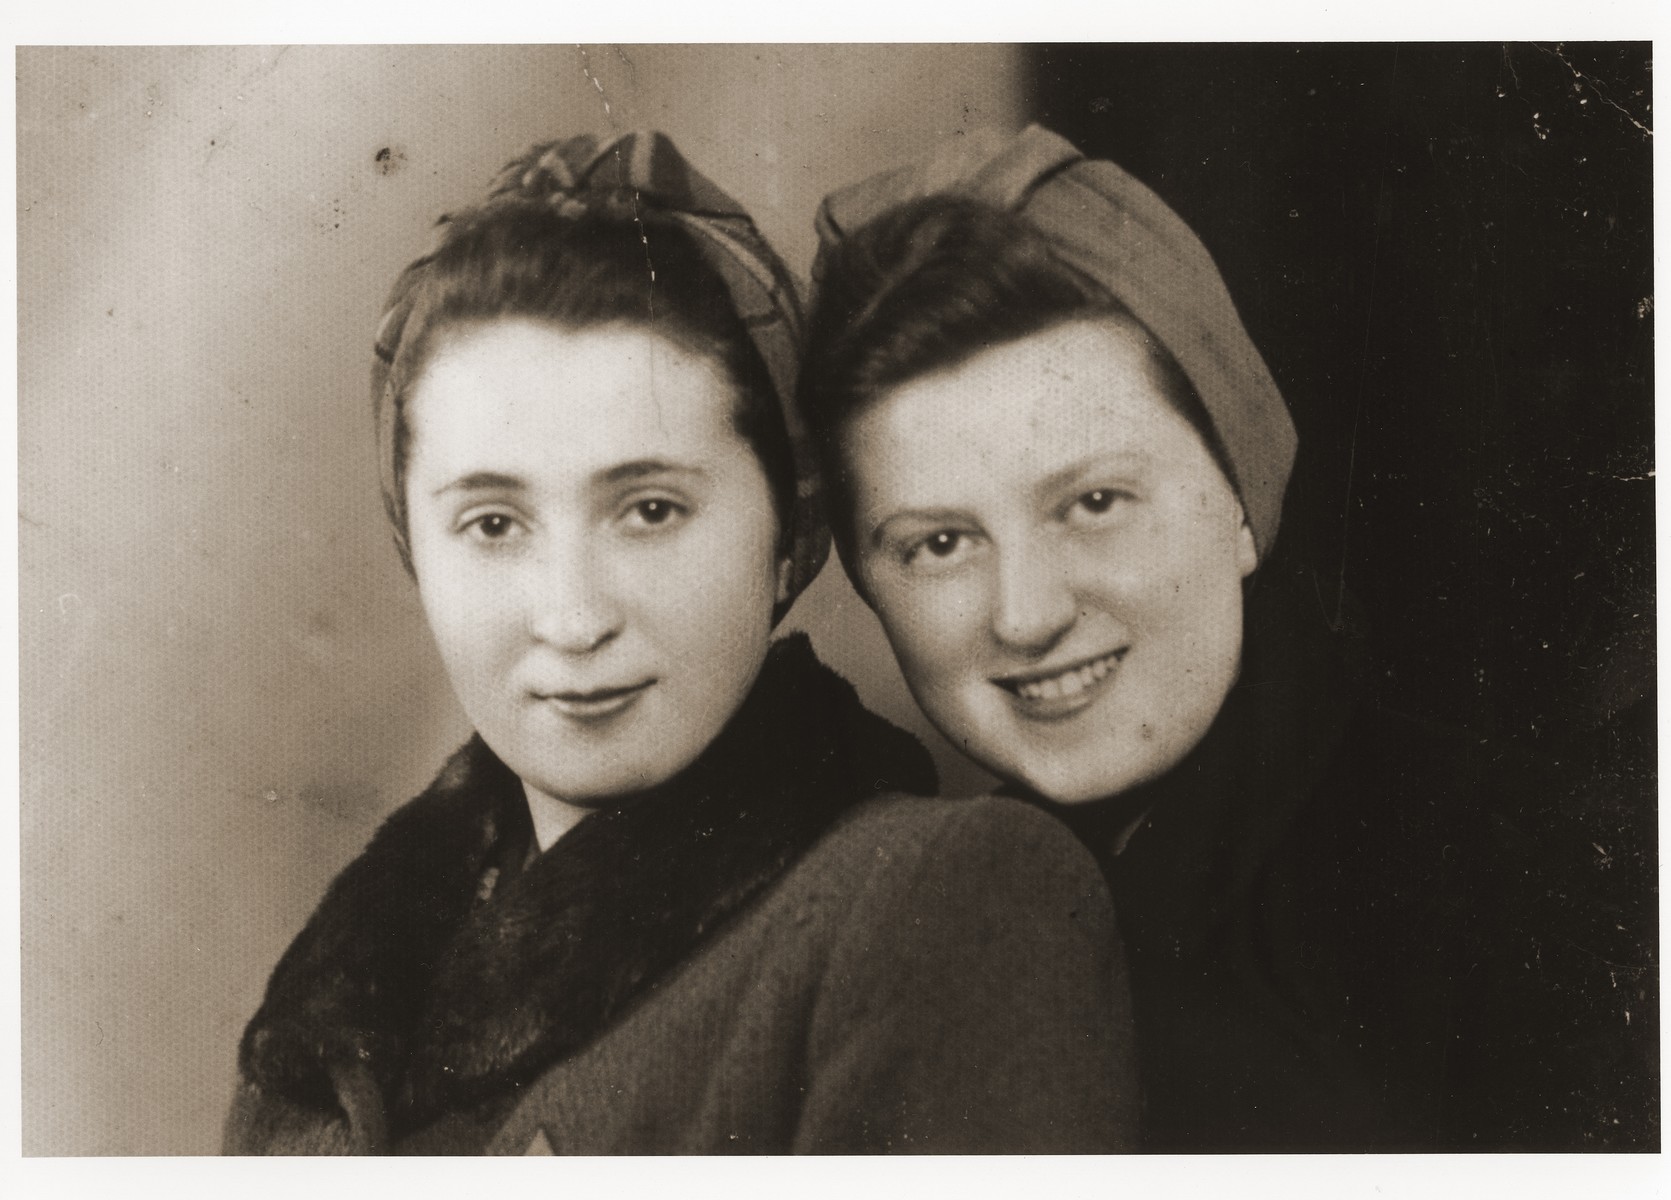 Portrait of two young women in the Dabrowa ghetto.

Pictured on the right is Renia (Zylberszac) Nadel.